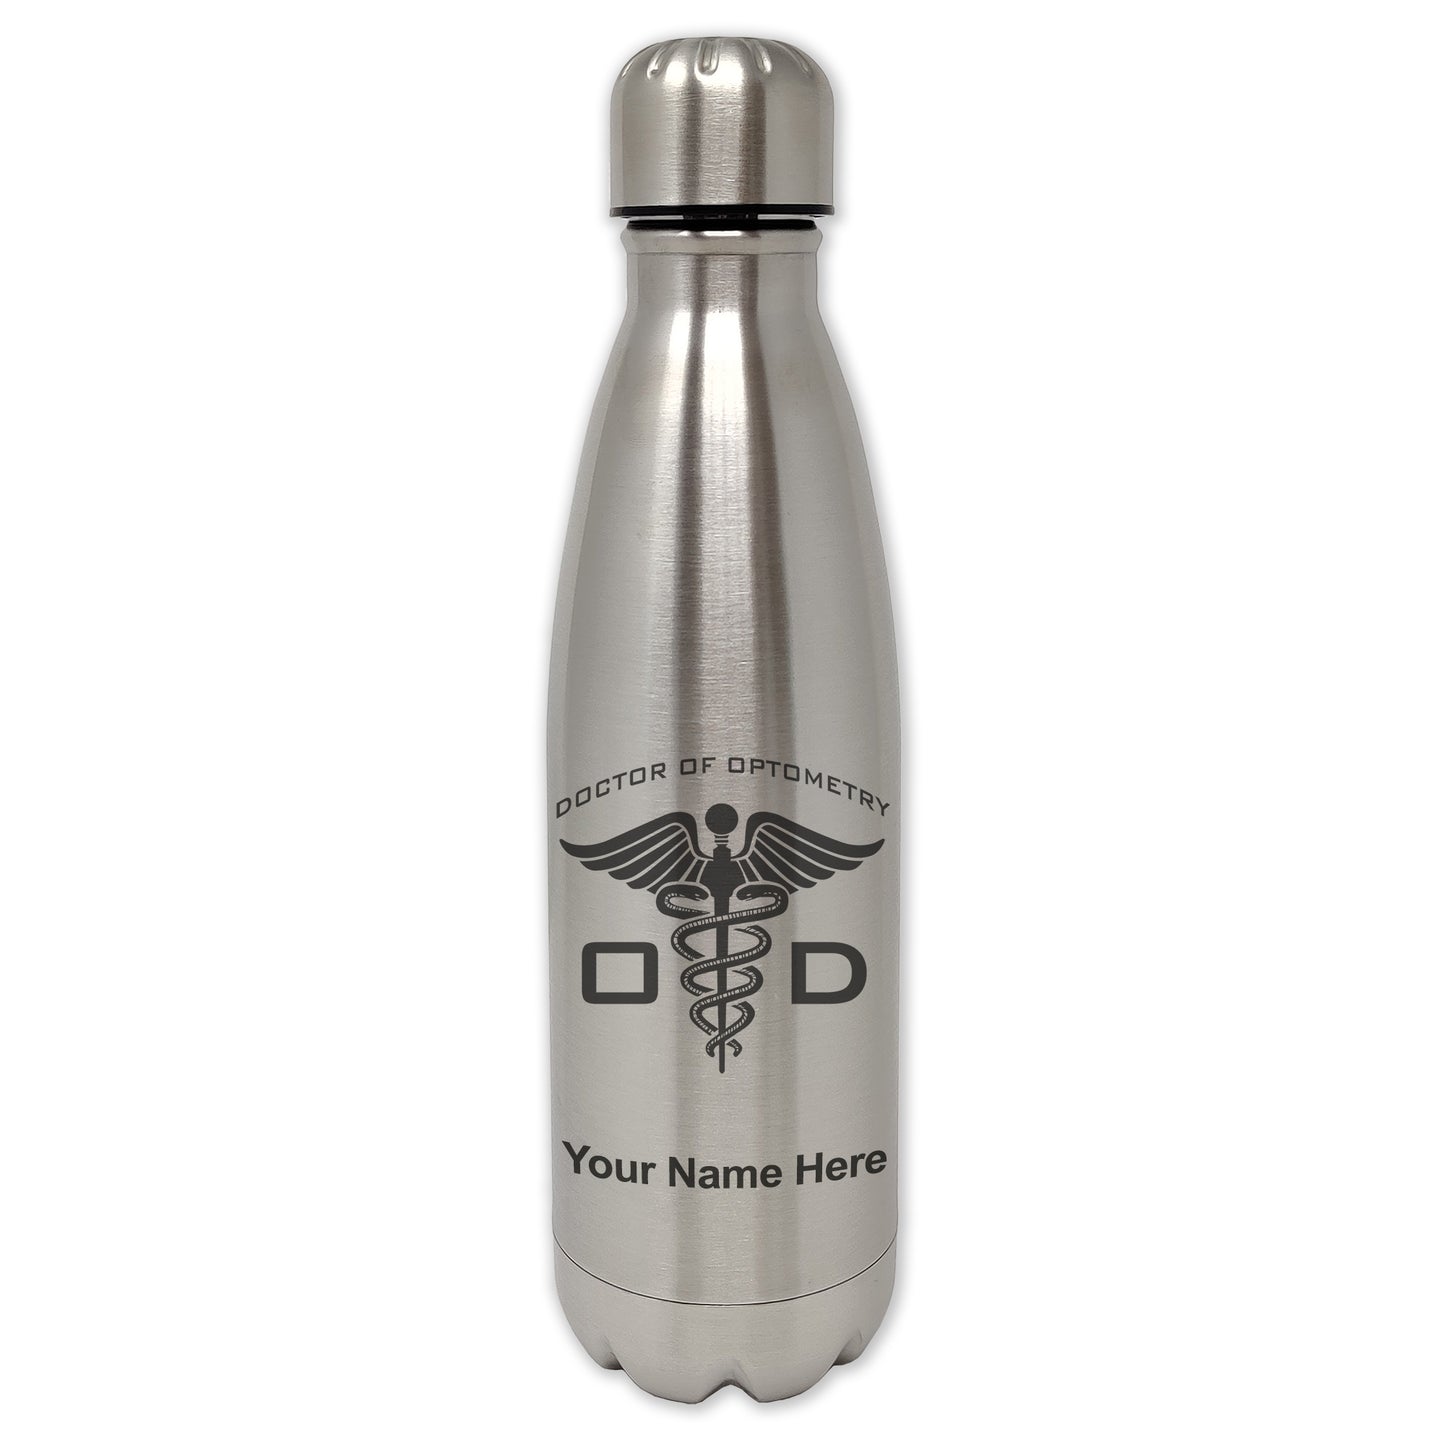 LaserGram Single Wall Water Bottle, OD Doctor of Optometry, Personalized Engraving Included